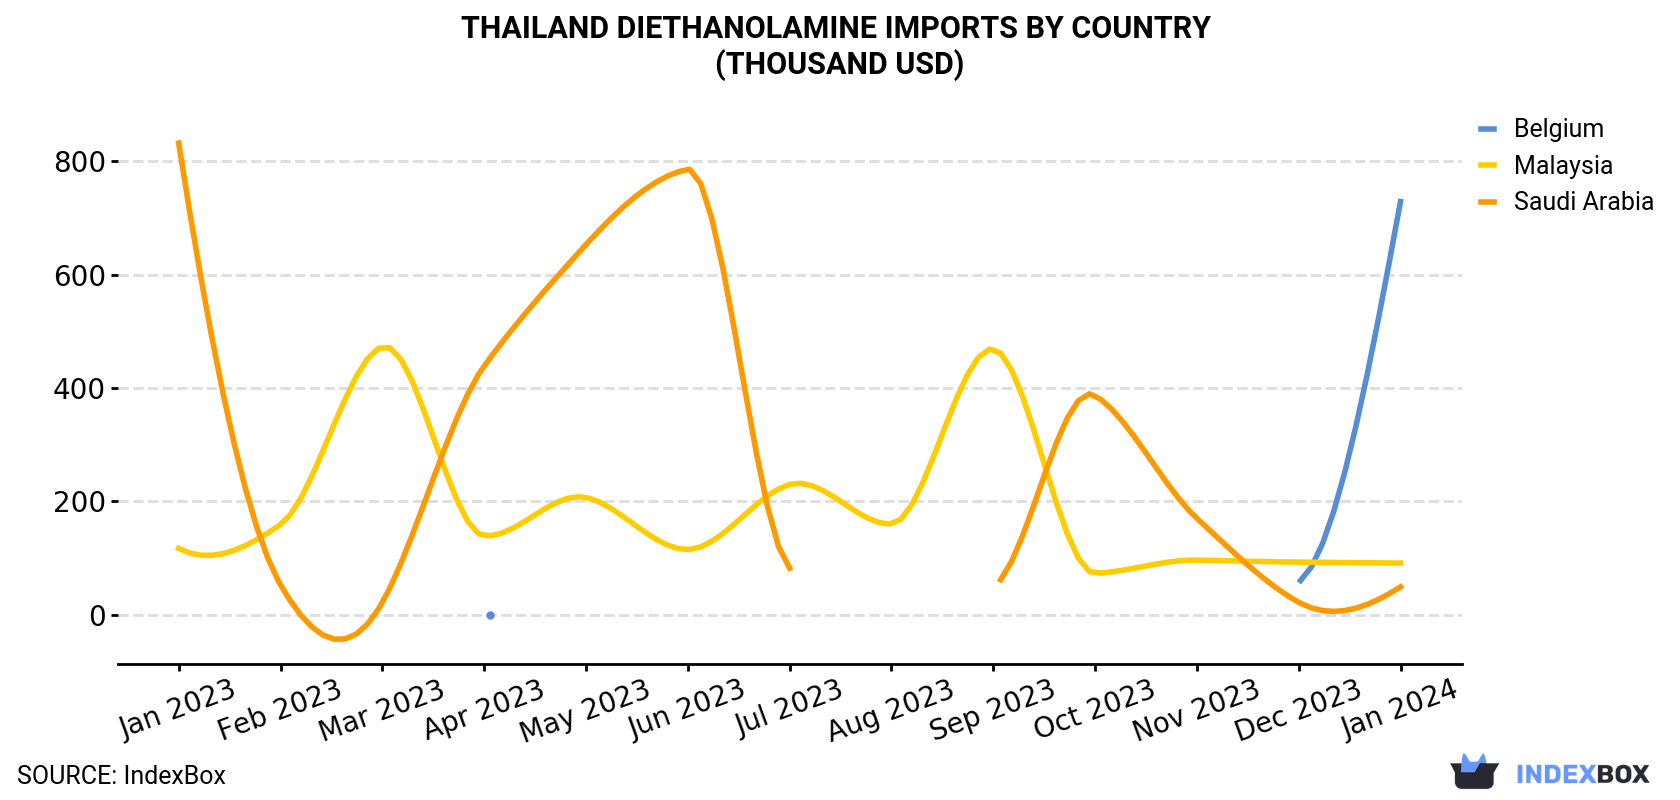 Thailand Diethanolamine Imports By Country (Thousand USD)